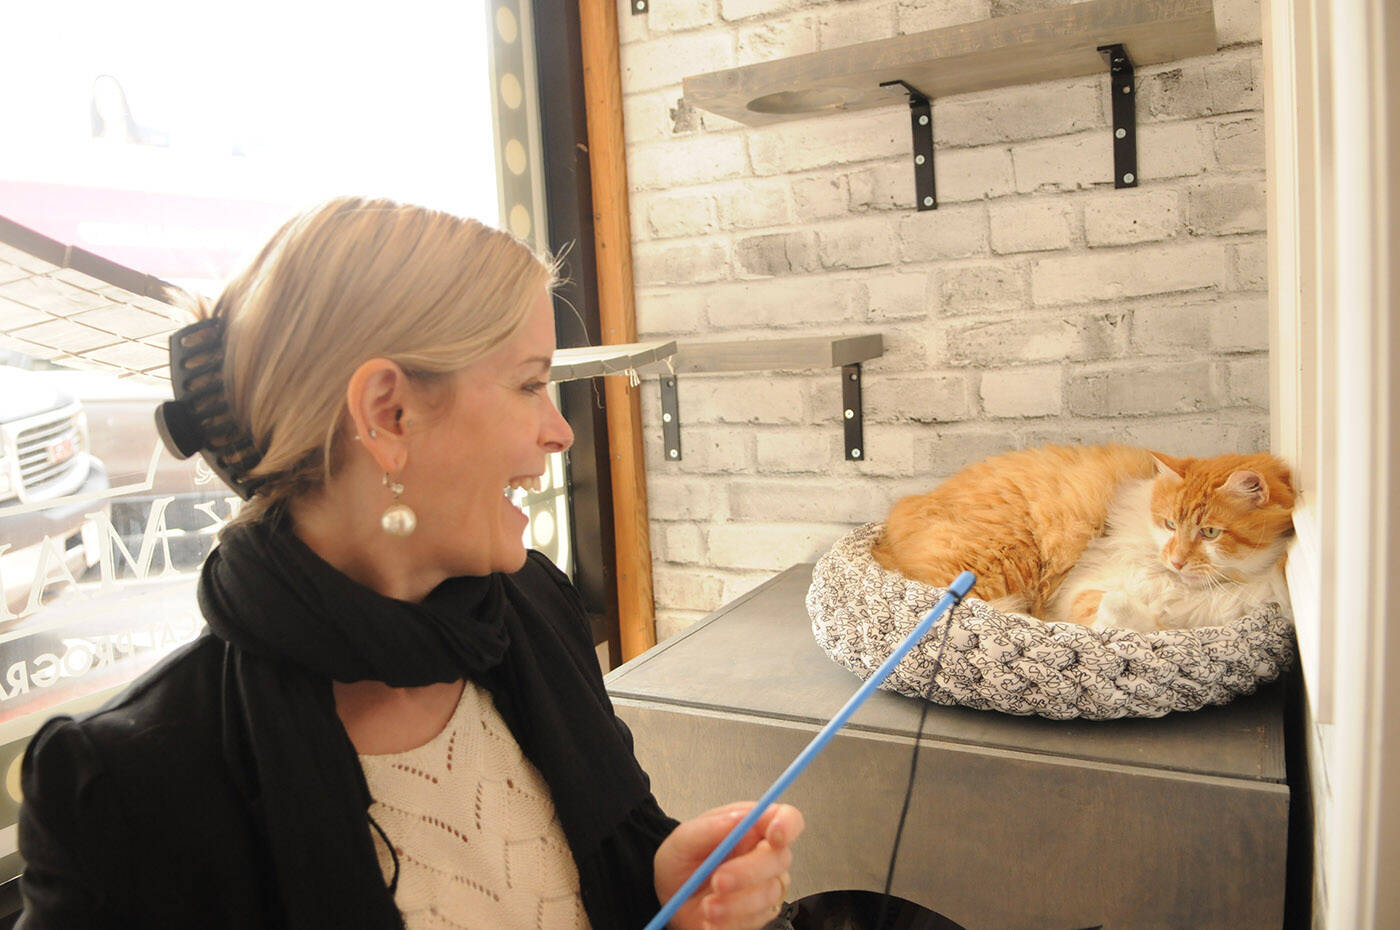 Amber Price, owner of The Book Man, gives Butters the cat some attention in the stores newly built cat adoption room on Thursday, April 14, 2022. (Jenna Hauck/ Chilliwack Progress)